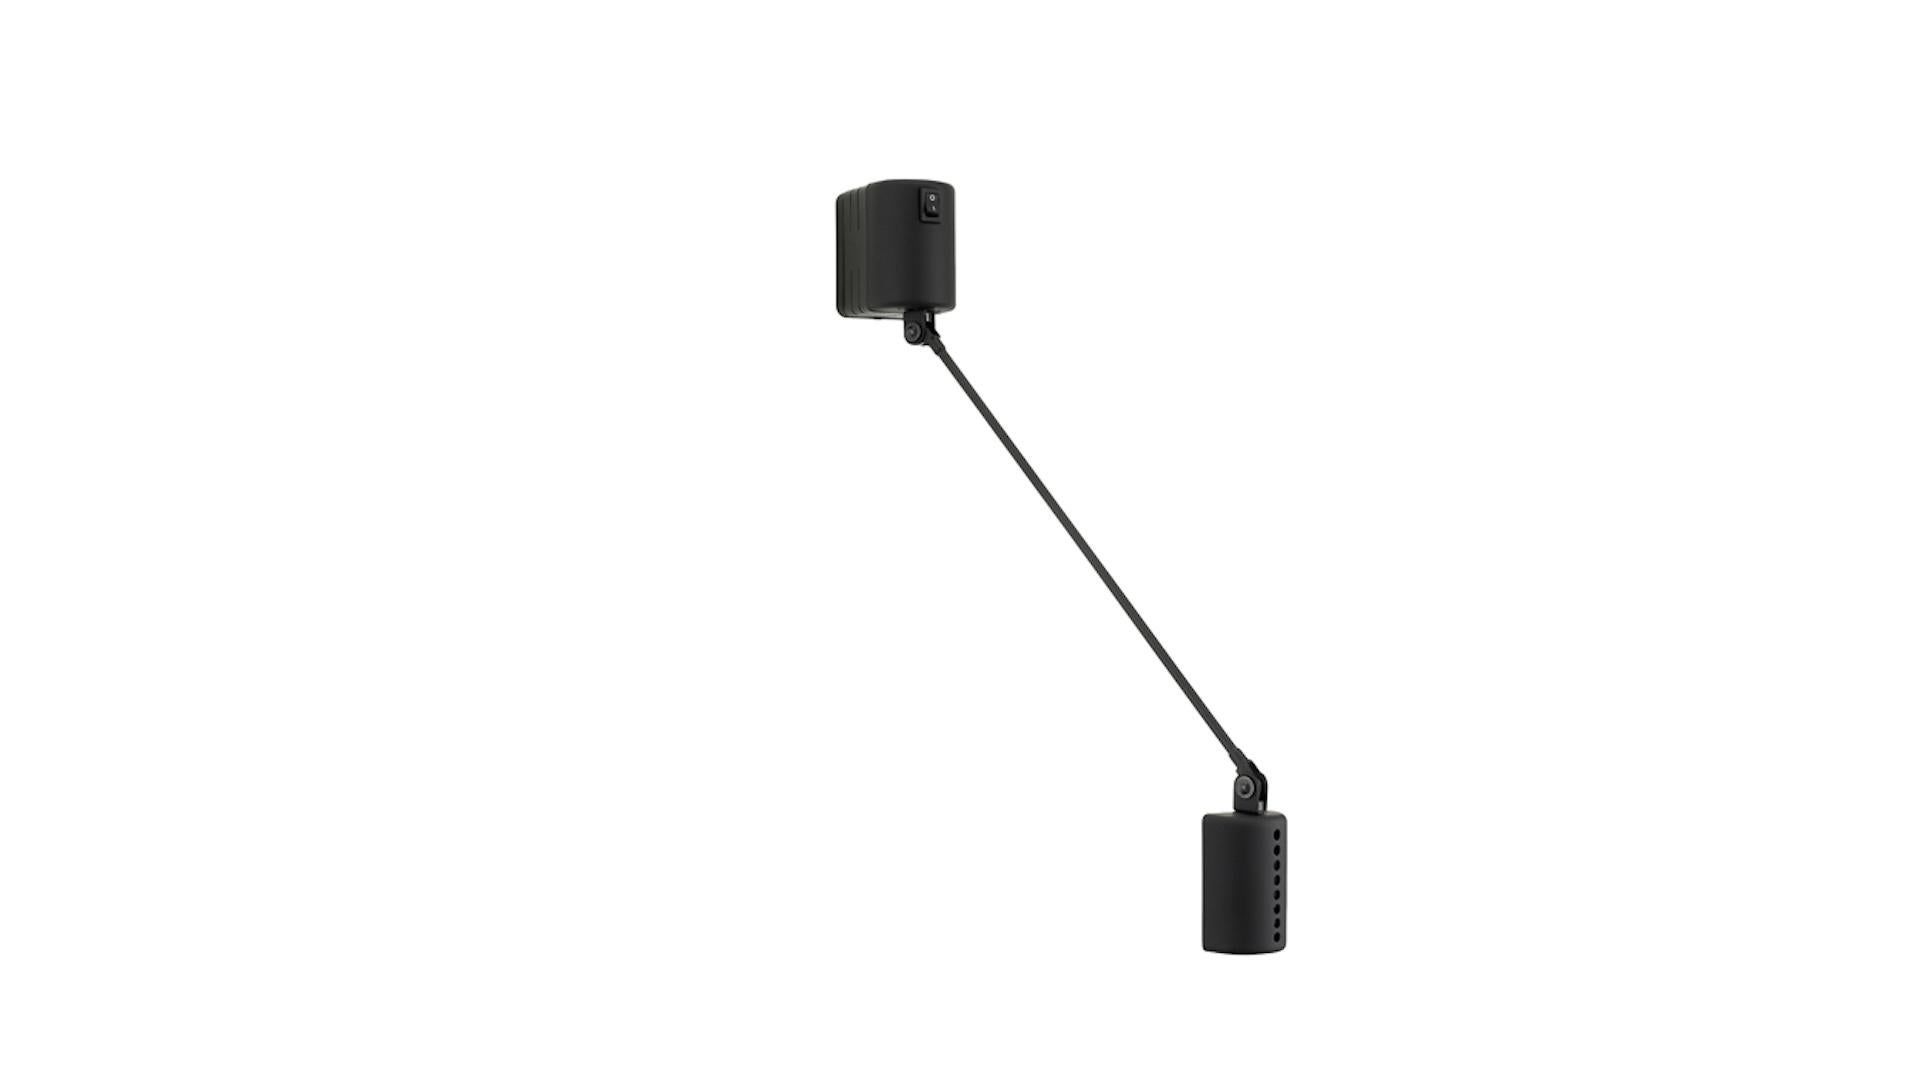 5W LED
On-off switch
The wall version, with its minimalist aesthetic, has a single arm that can be rotated through 180° horizontally and 90° vertically, till fully up against the wall. Of the Daphine, it retains the unmistakable semi-cylindrical